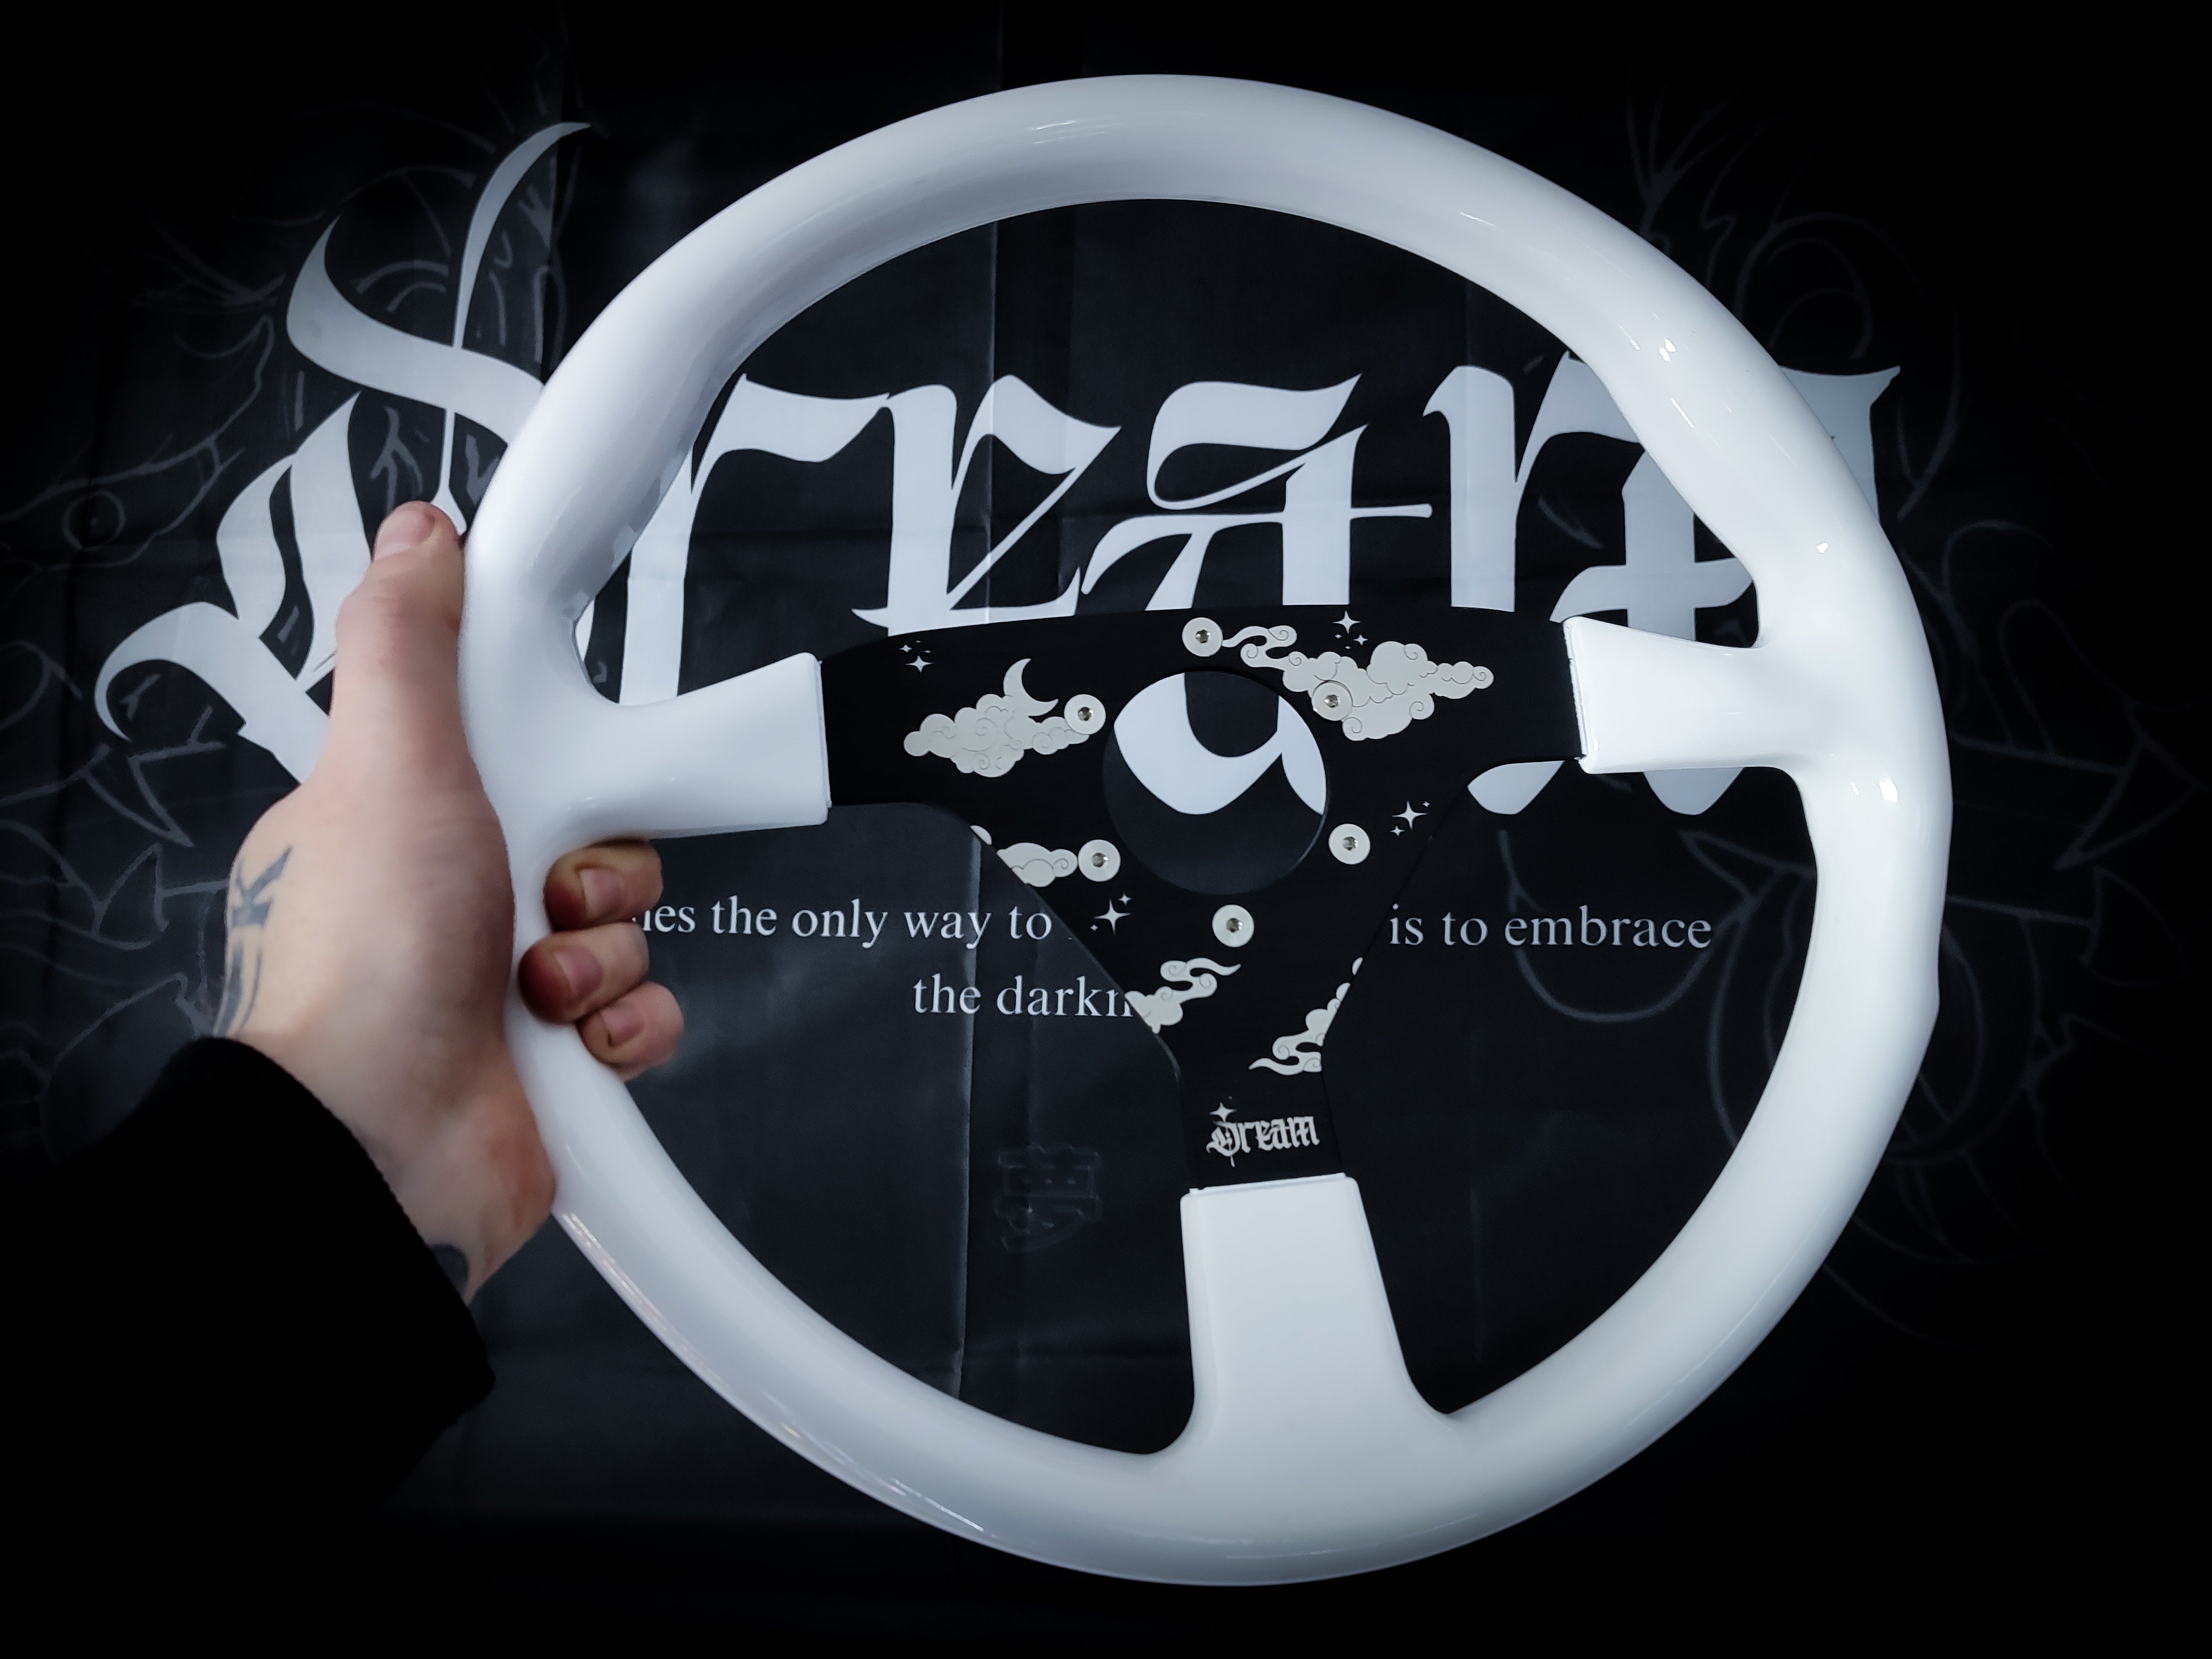 LIMITED Polar White "Dream" Etched Flat Face Steering Wheel